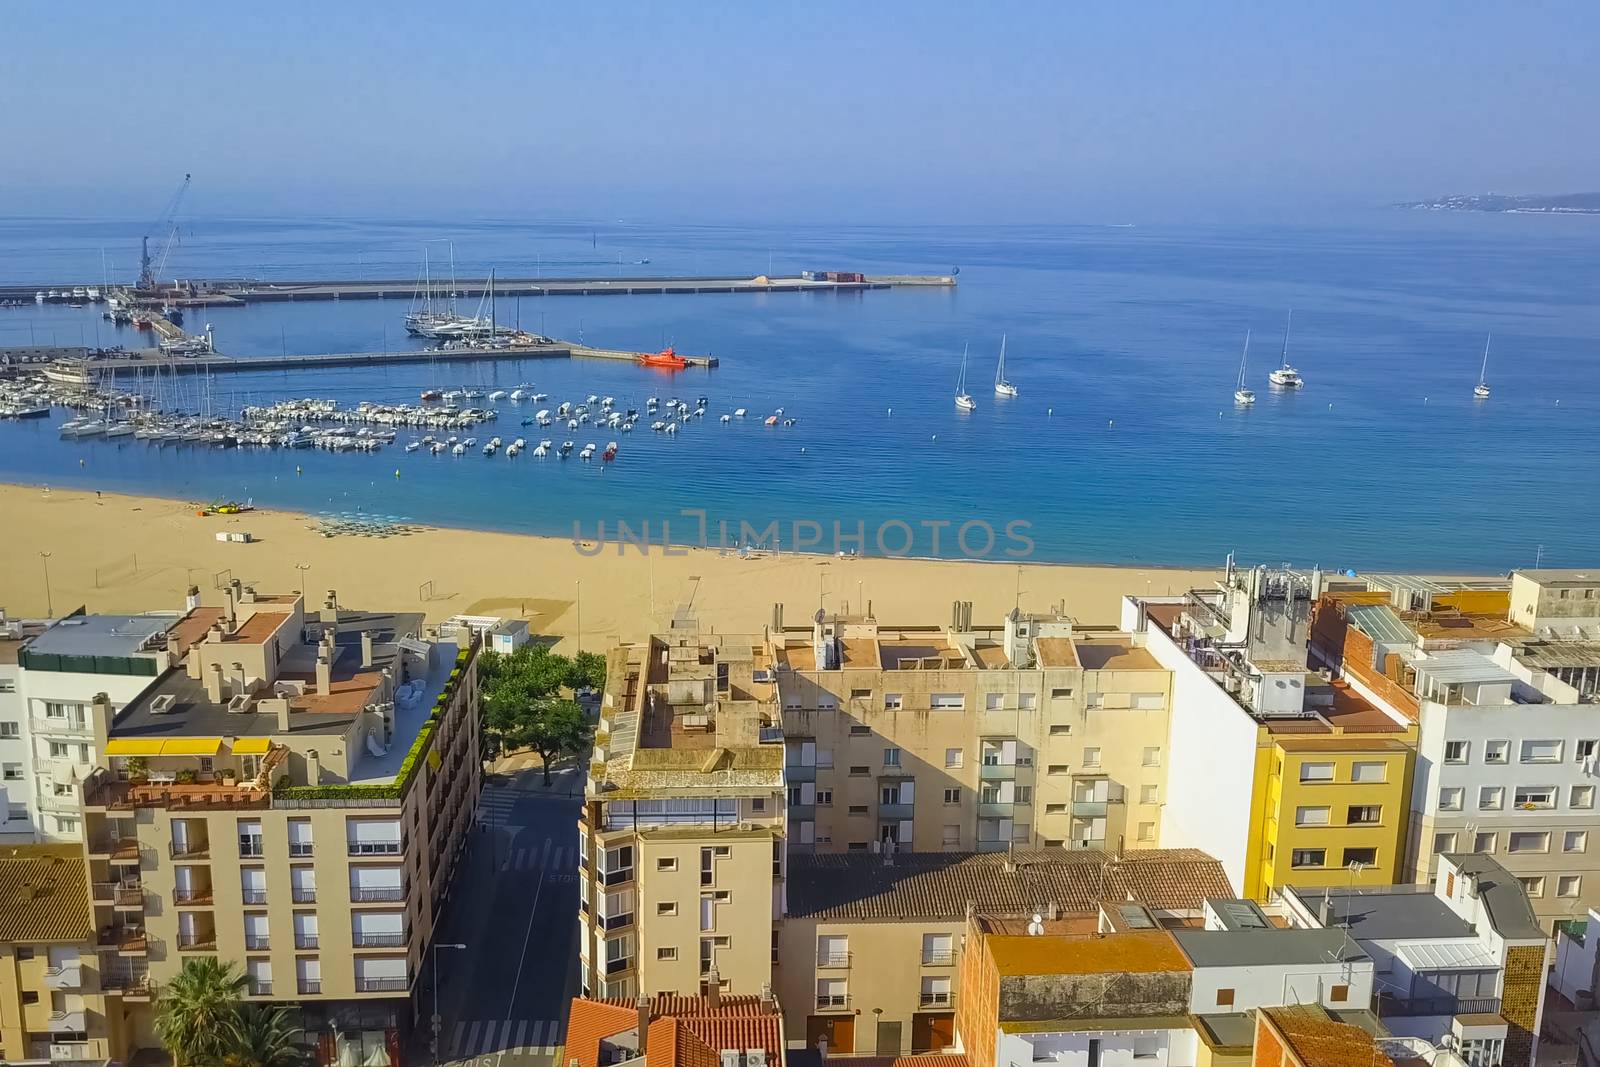 Mediterranean coast in Spain. Spain's courts by the sea. by DePo